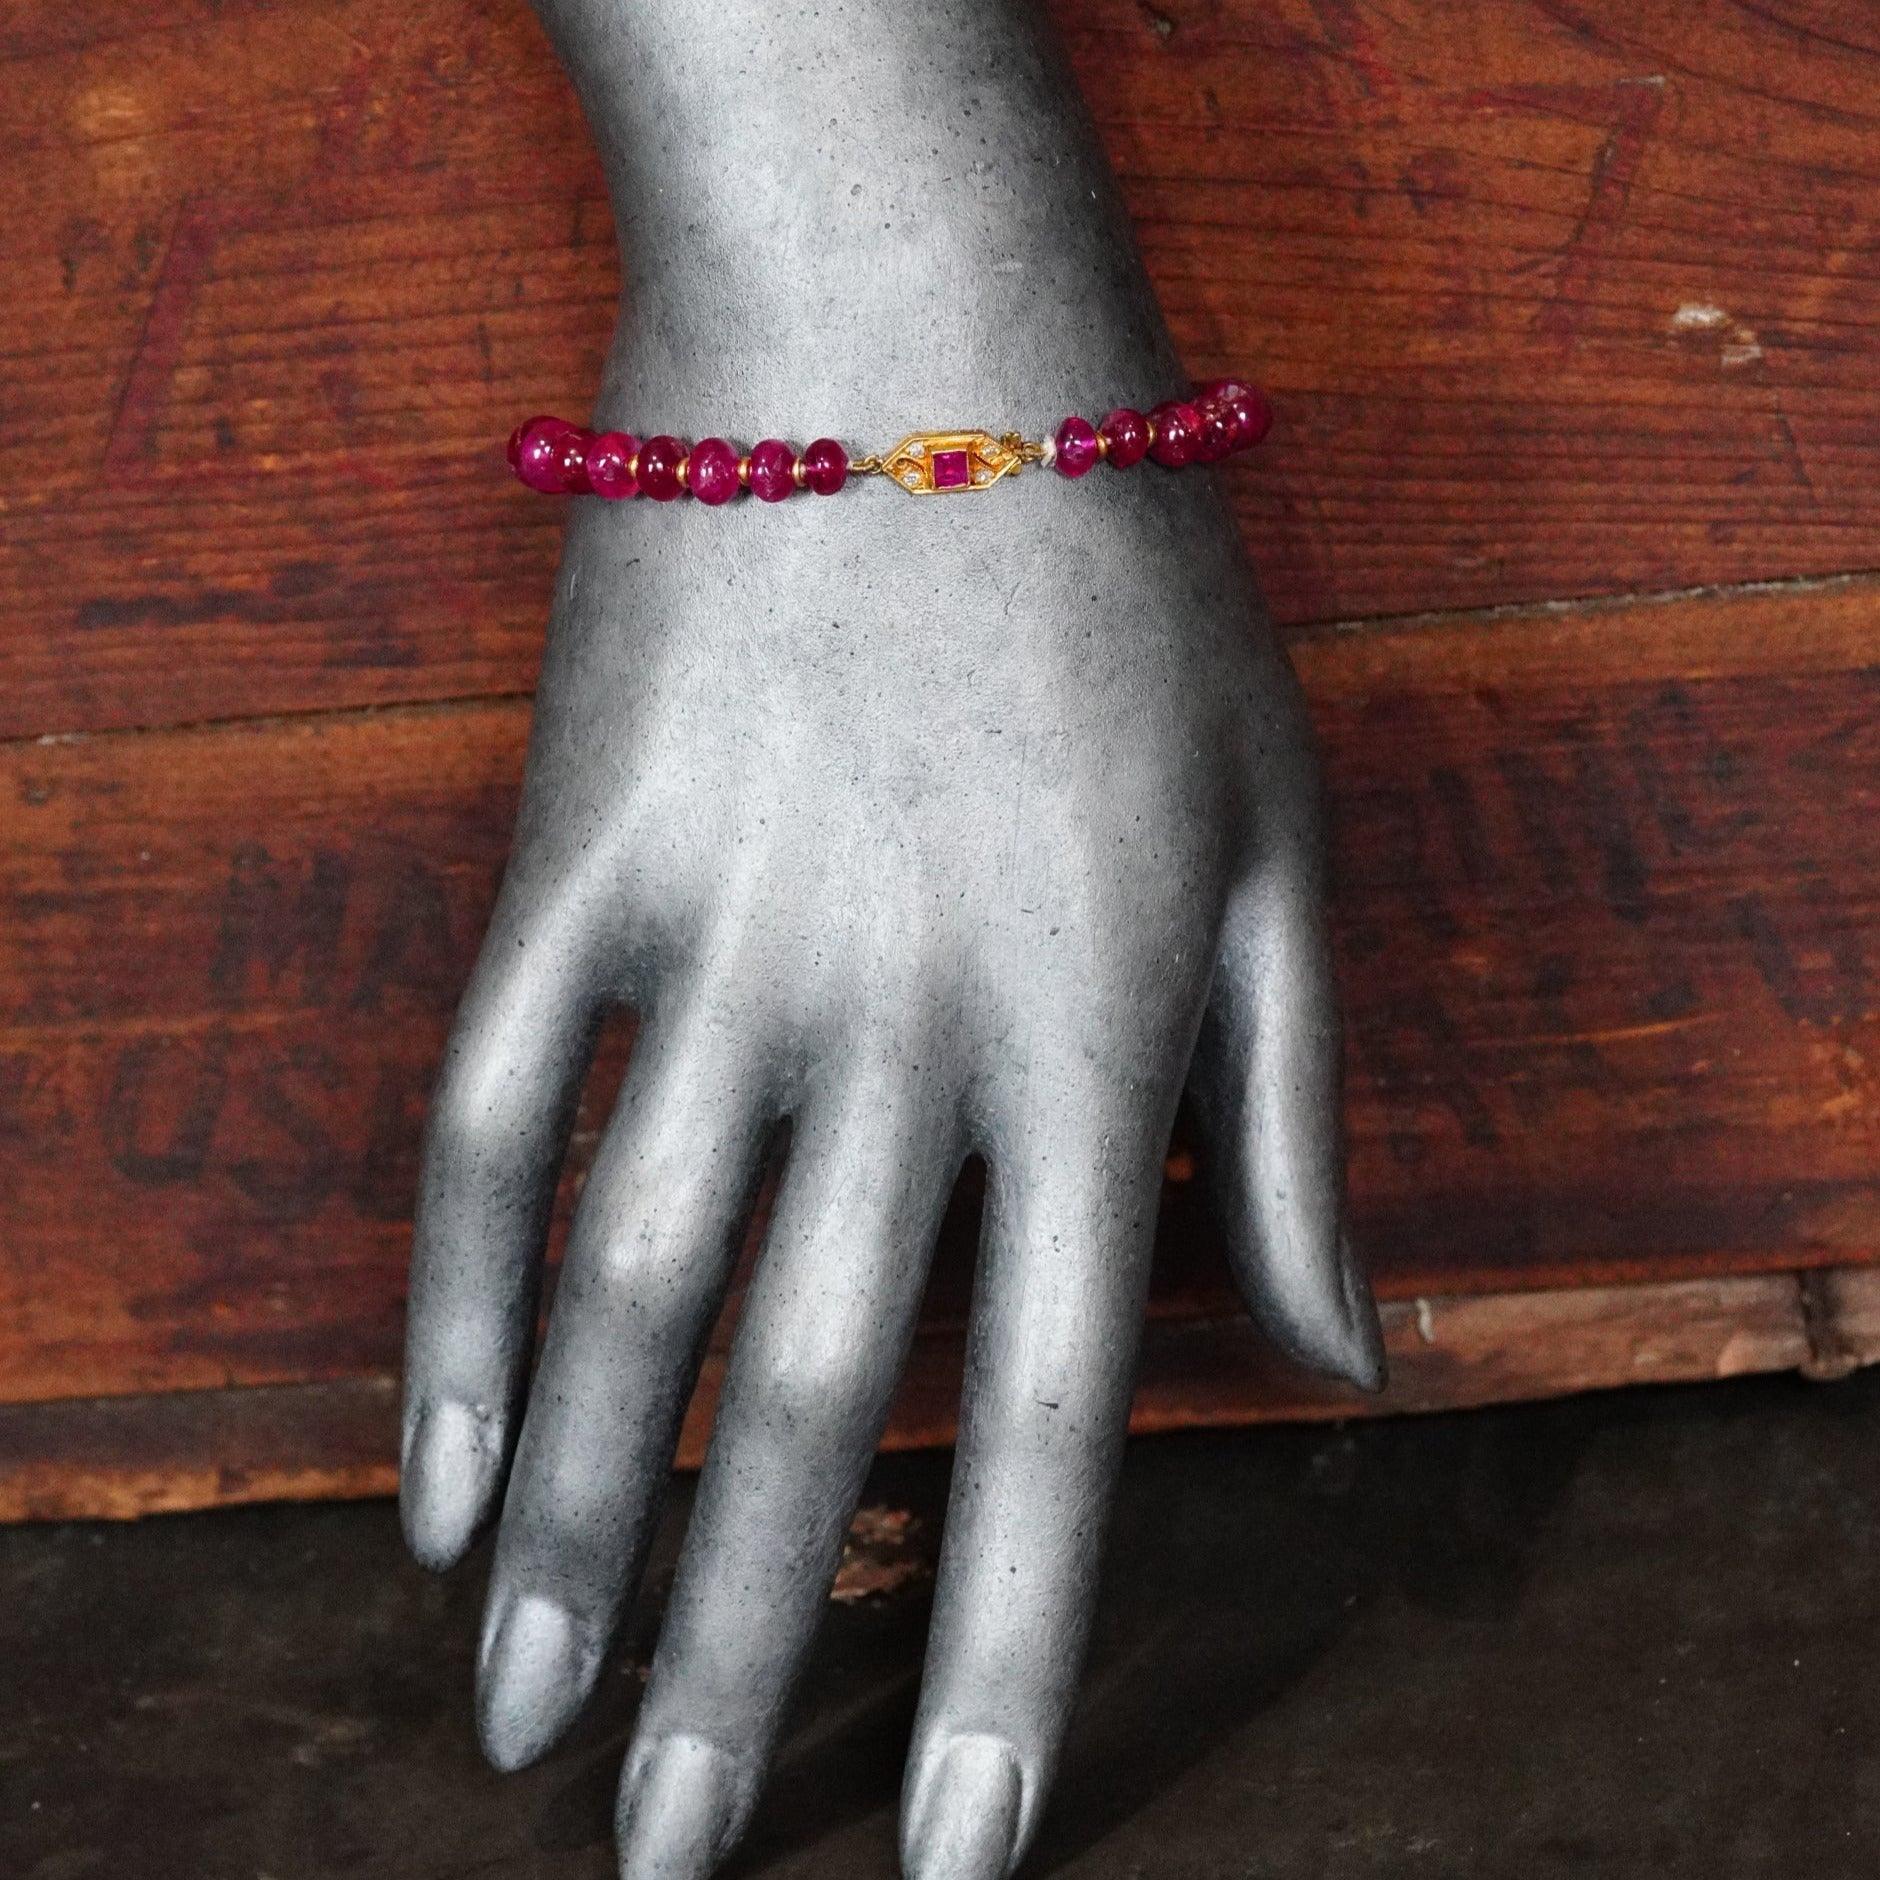 Captivating Mughal gold bracelet with Burma no heat ruby and early Victorian-style clasp from the Jogani collection